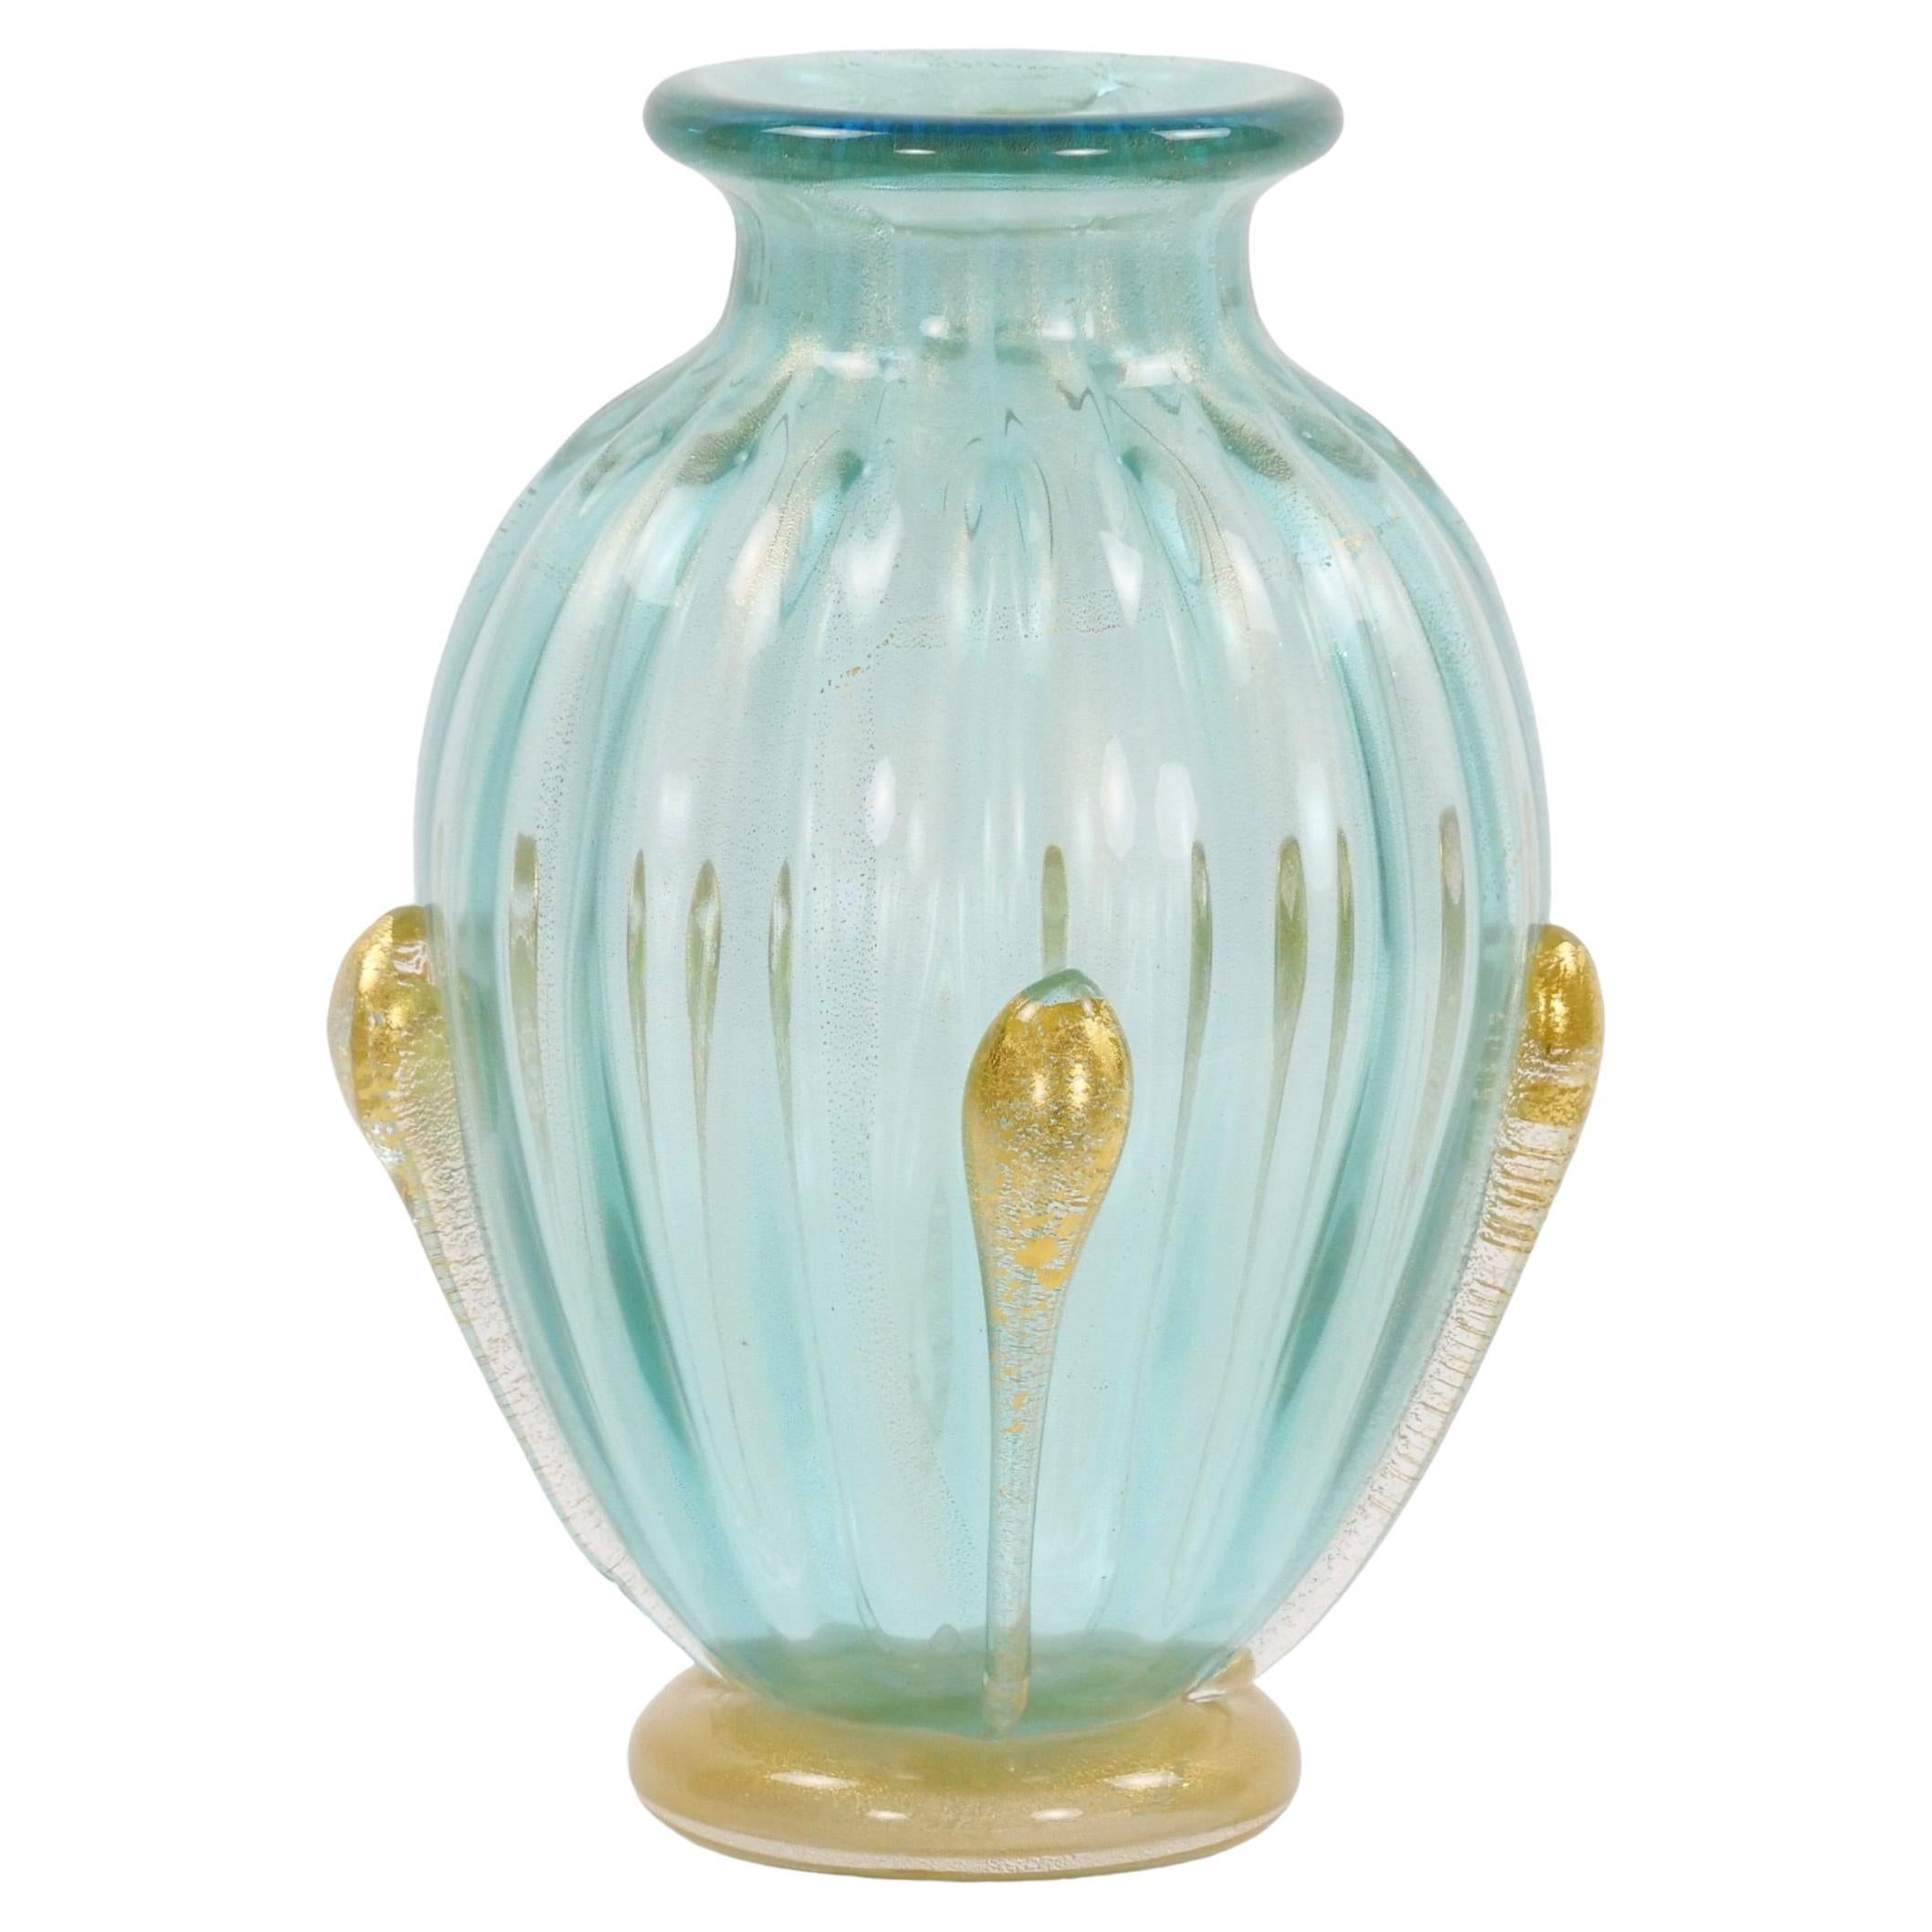 Hand-crafted Mouth Blown Gold Flecks Exquisite Venetian Glass Vase